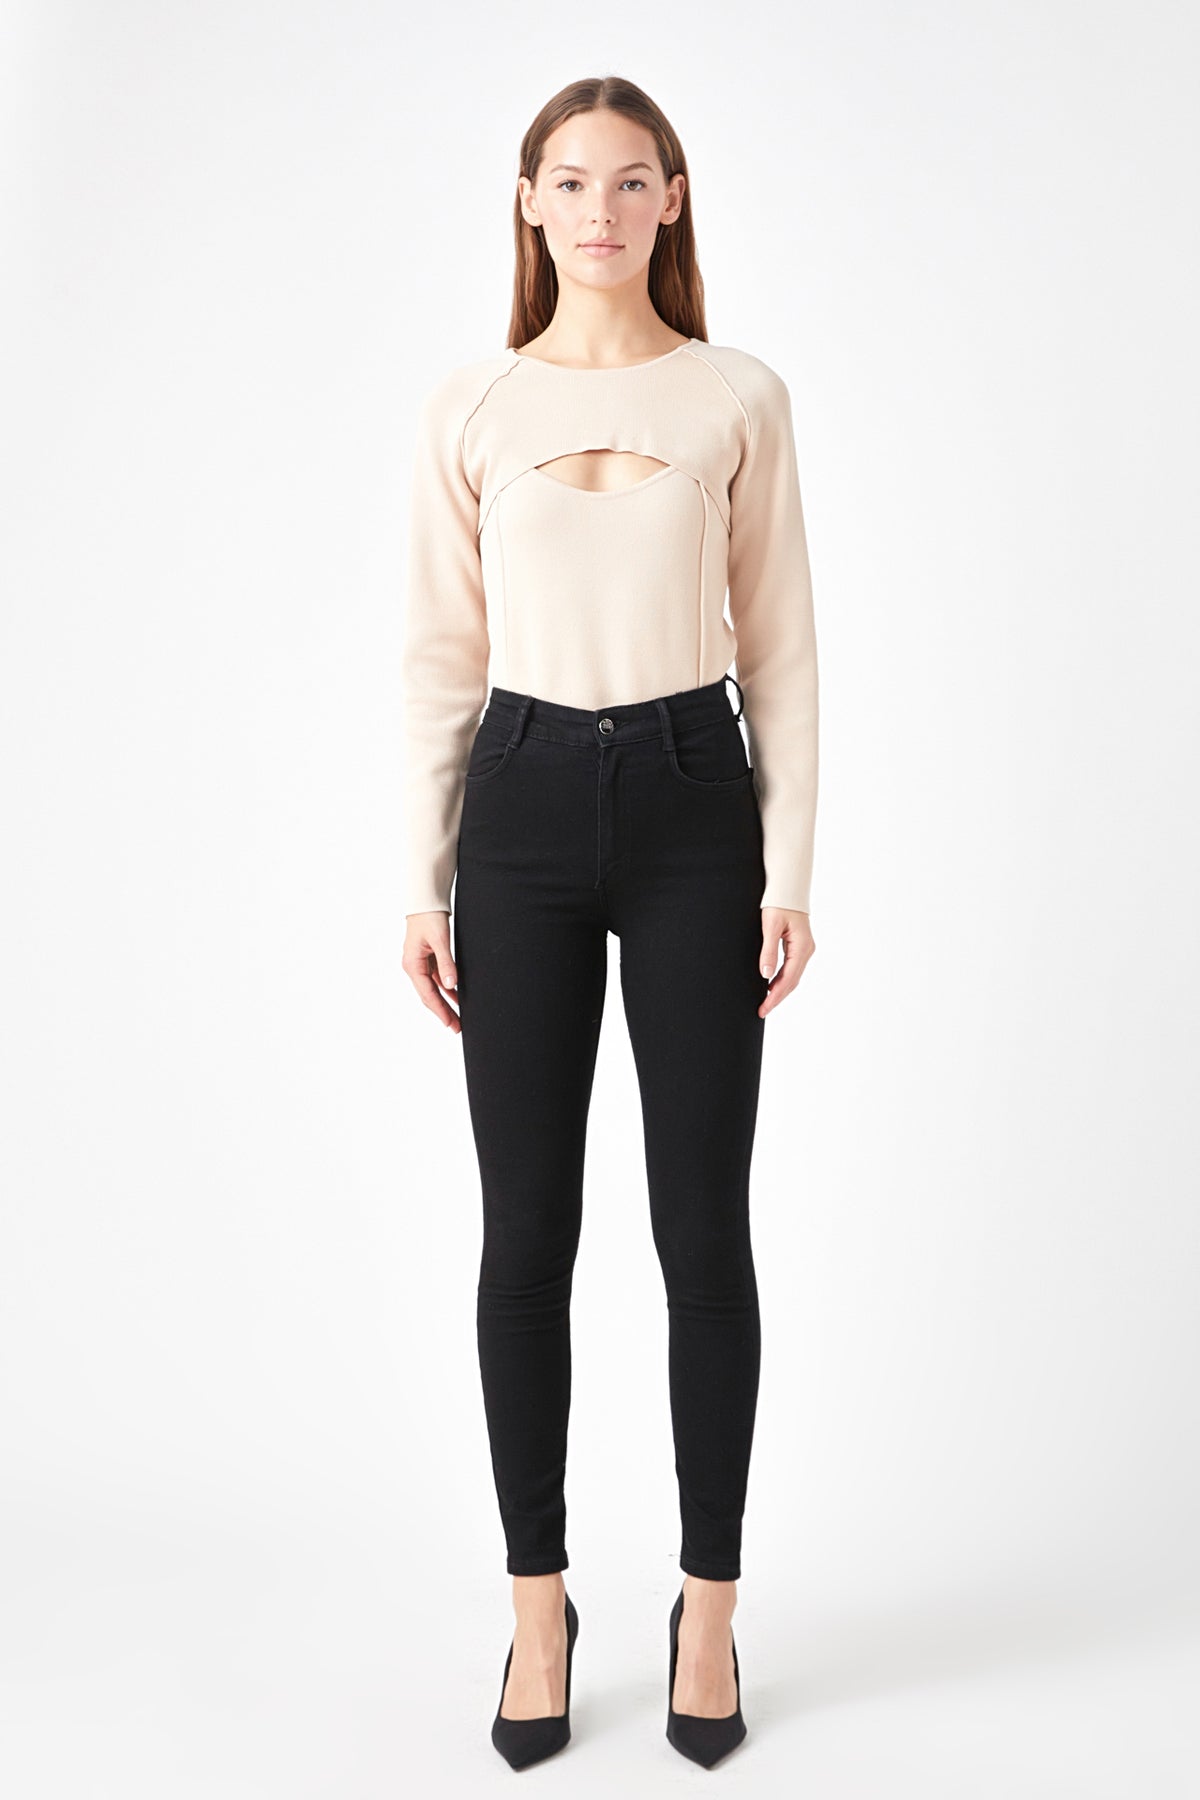 ENDLESS ROSE - Cropped 2 Piece set Sweater - SWEATERS & KNITS available at Objectrare